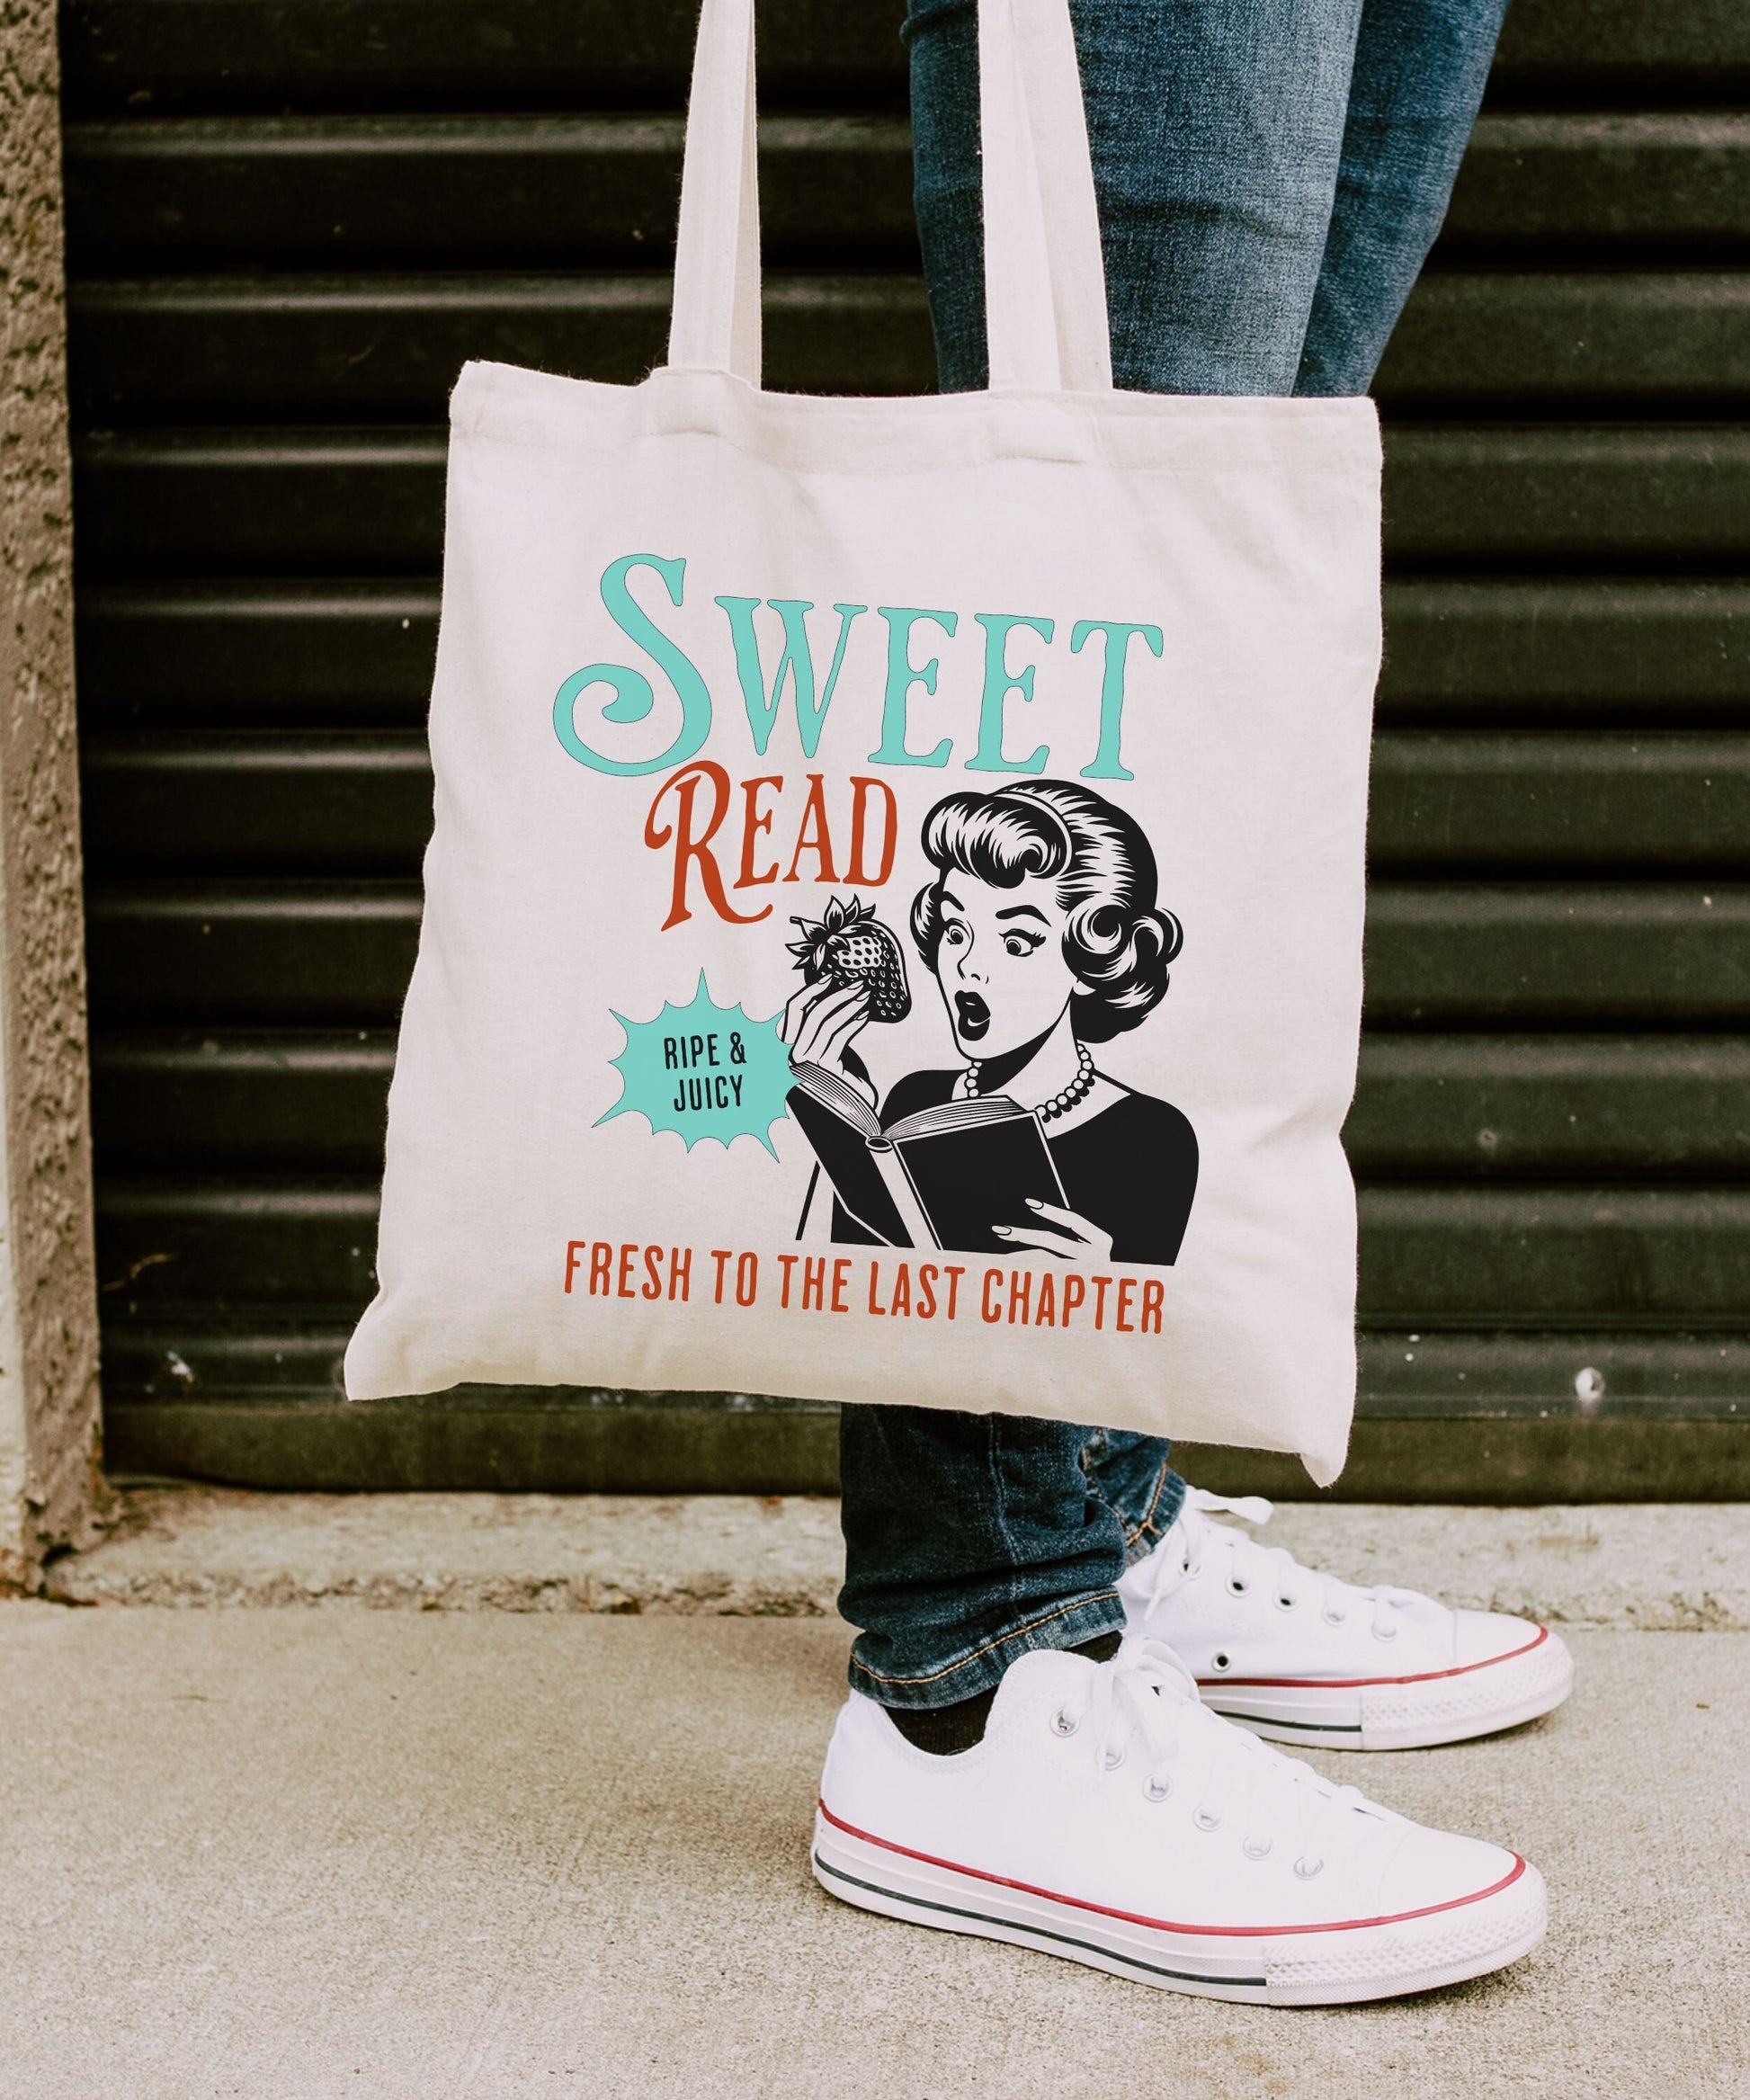 Sweet Read Strawberry Tote Bag, Bookish Things Totebag Smut Gifts Read Banned Books Booktrovert Book Club Bag Library Bag Book Themed Gifts